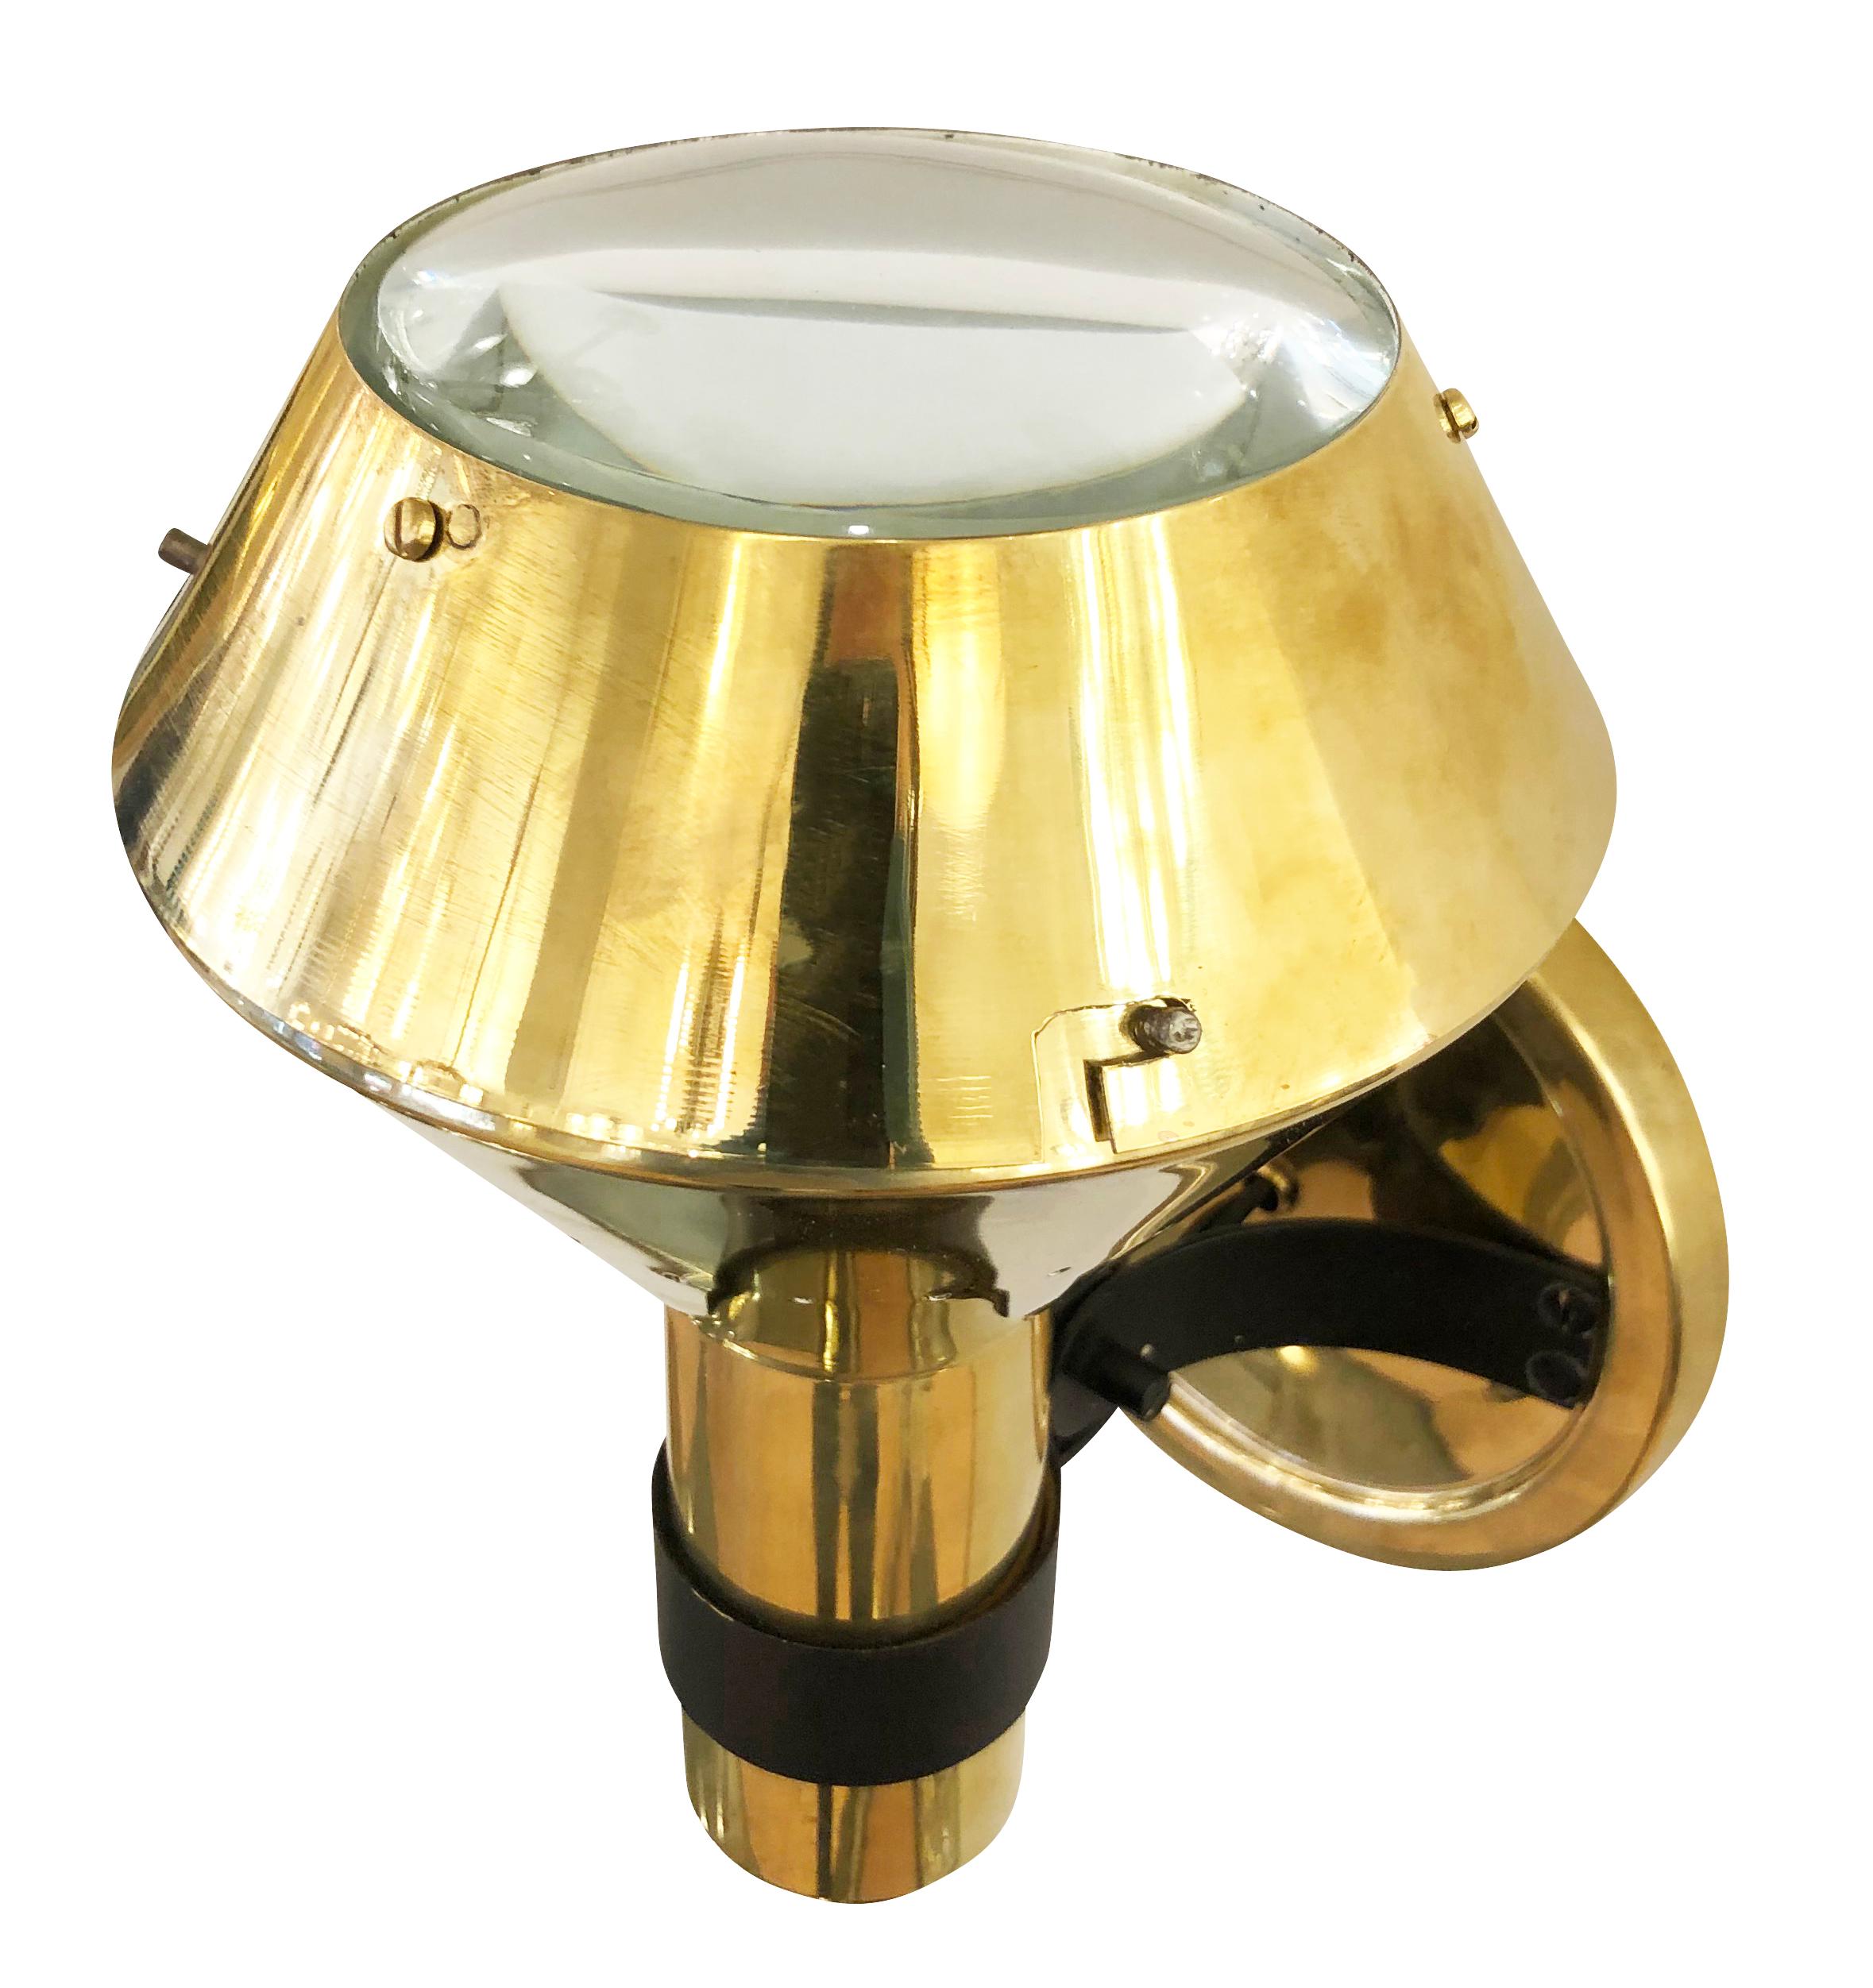 Brass sconces by Candle, a subsidiary of Fontana Arte. The shade is adjustable and ends with a thick glass lens. Can be mounted with the lens facing up or down. Price per pair. 3 pairs available.

Condition: Excellent vintage condition, minor wear